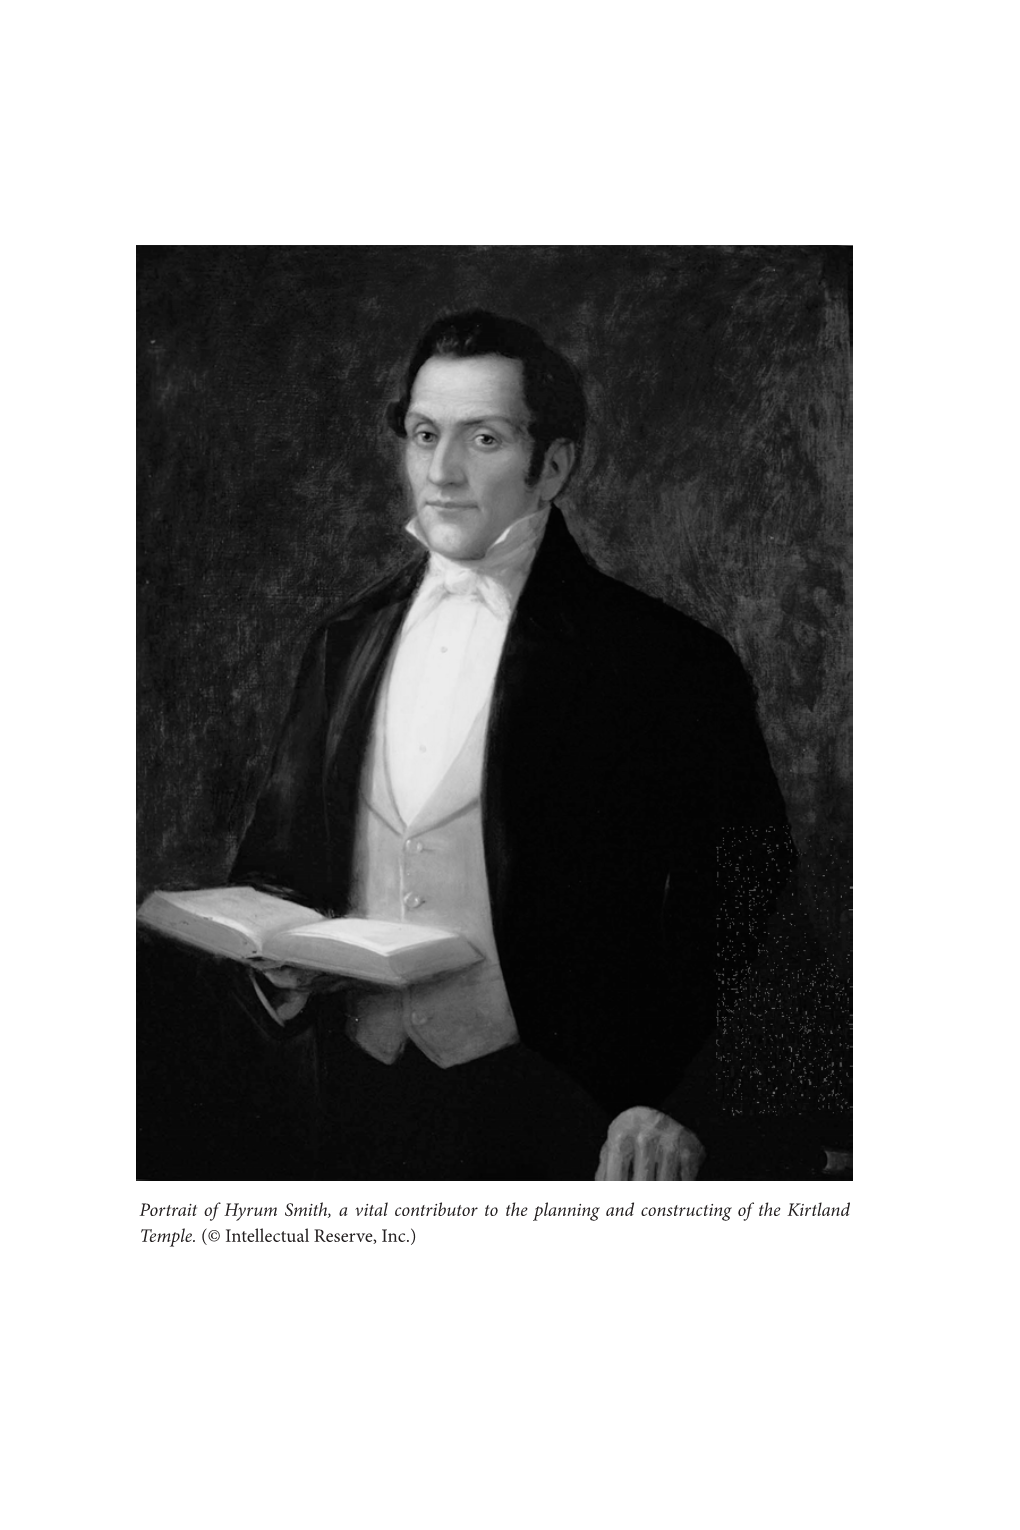 Portrait of Hyrum Smith, a Vital Contributor to the Planning and Constructing of the Kirtland Temple